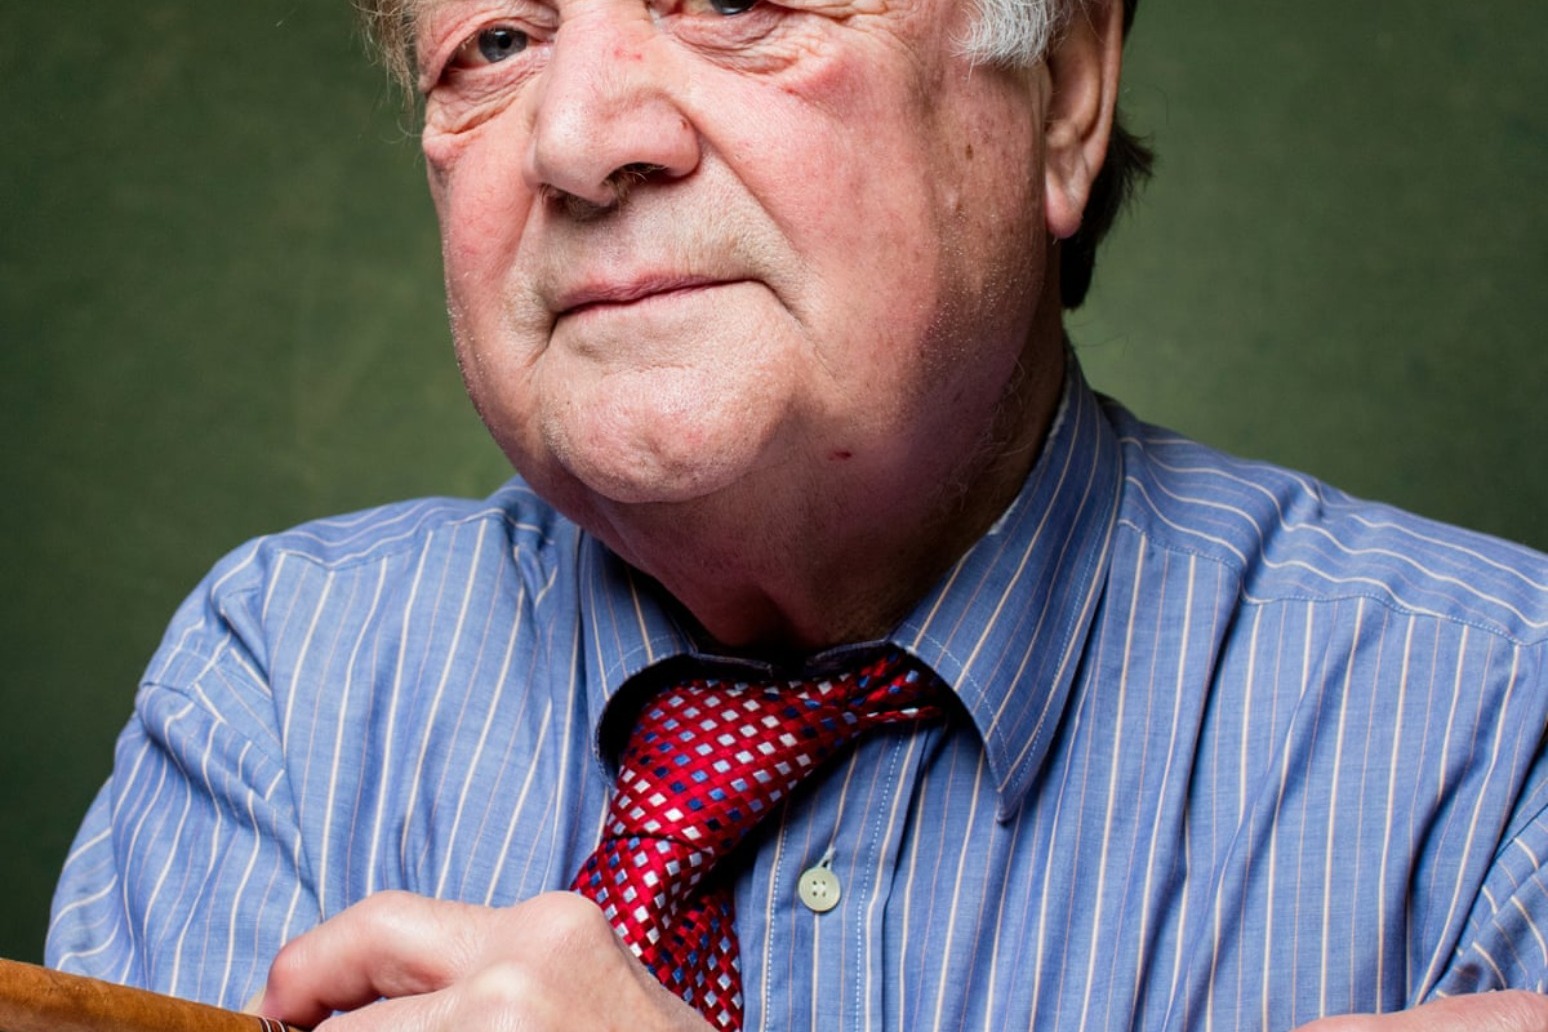 Ken Clarke tells Sunak to consider tax hikes to repair finances from Covid. 